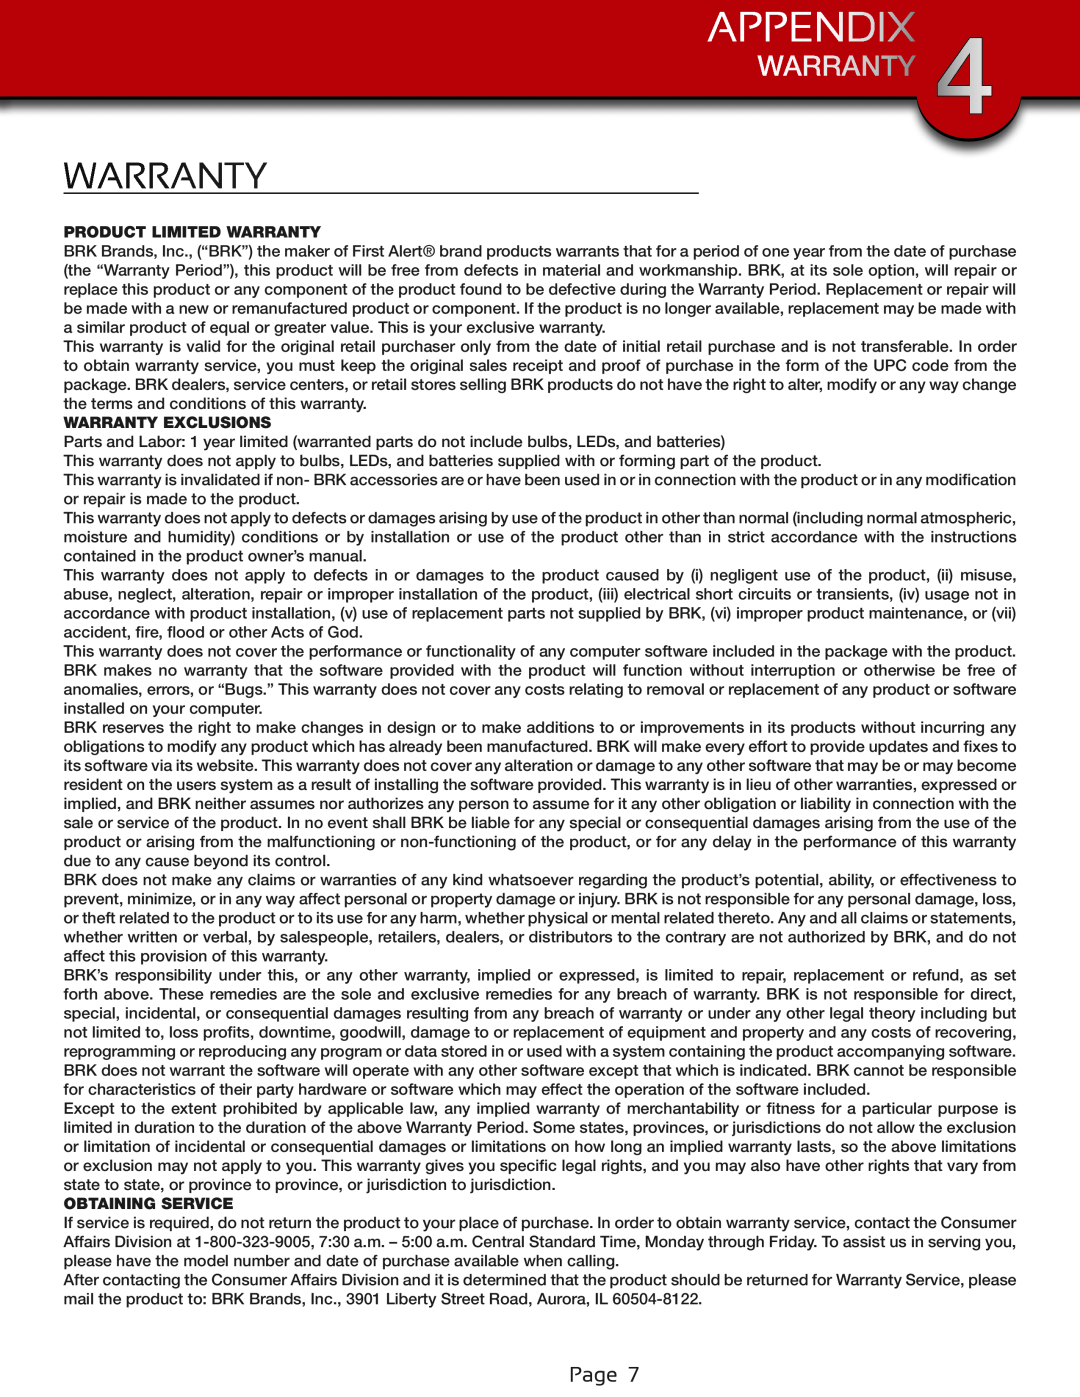 First Alert DWC-400 user manual Appendix, Product Limited Warranty, Warranty Exclusions, Obtaining Service 